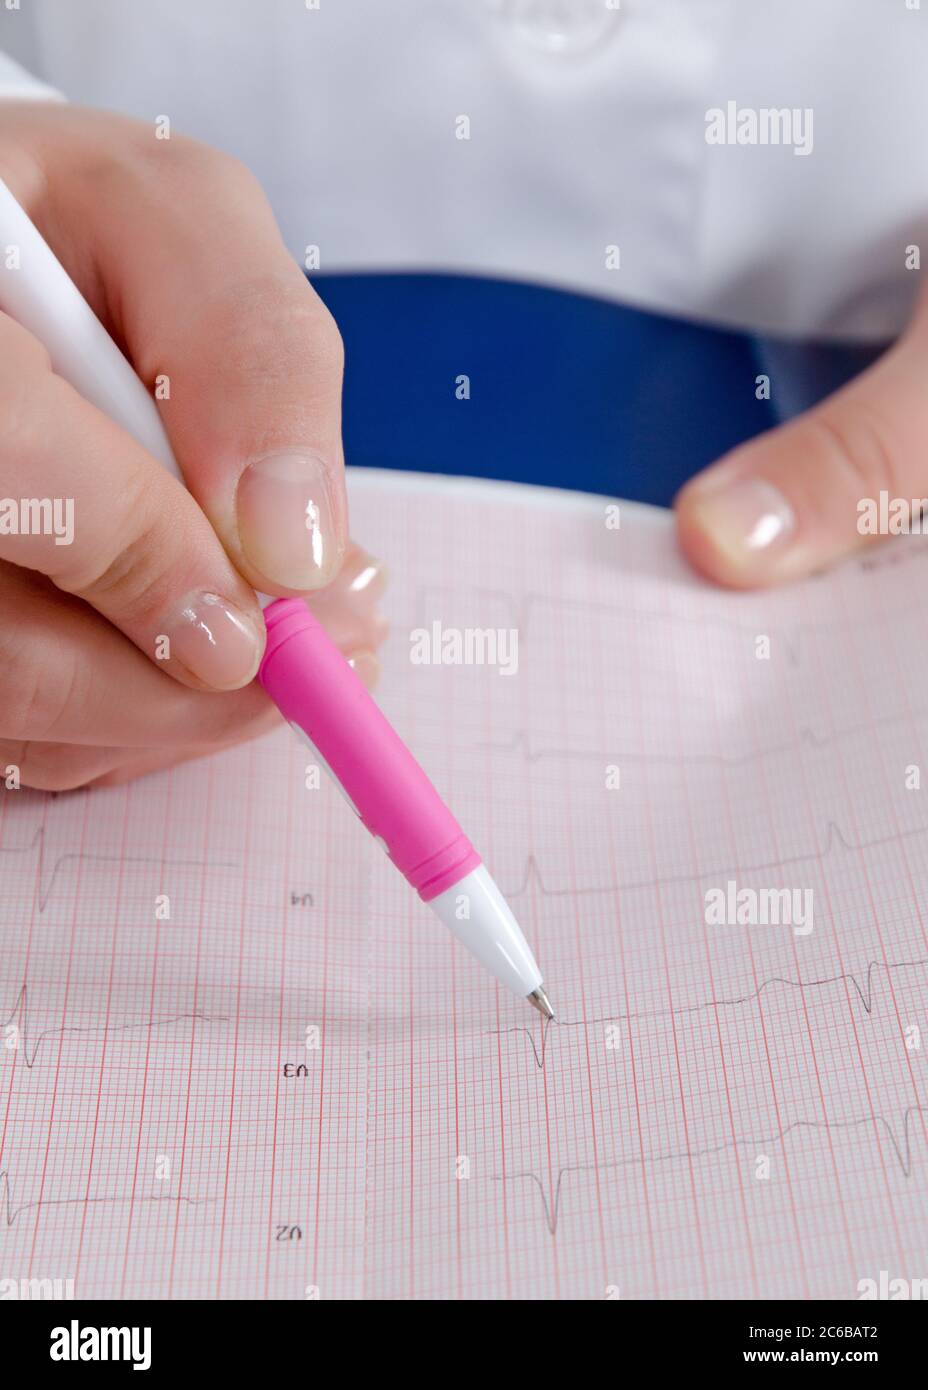 Electrocardiogram in the hands of doctor Stock Photo